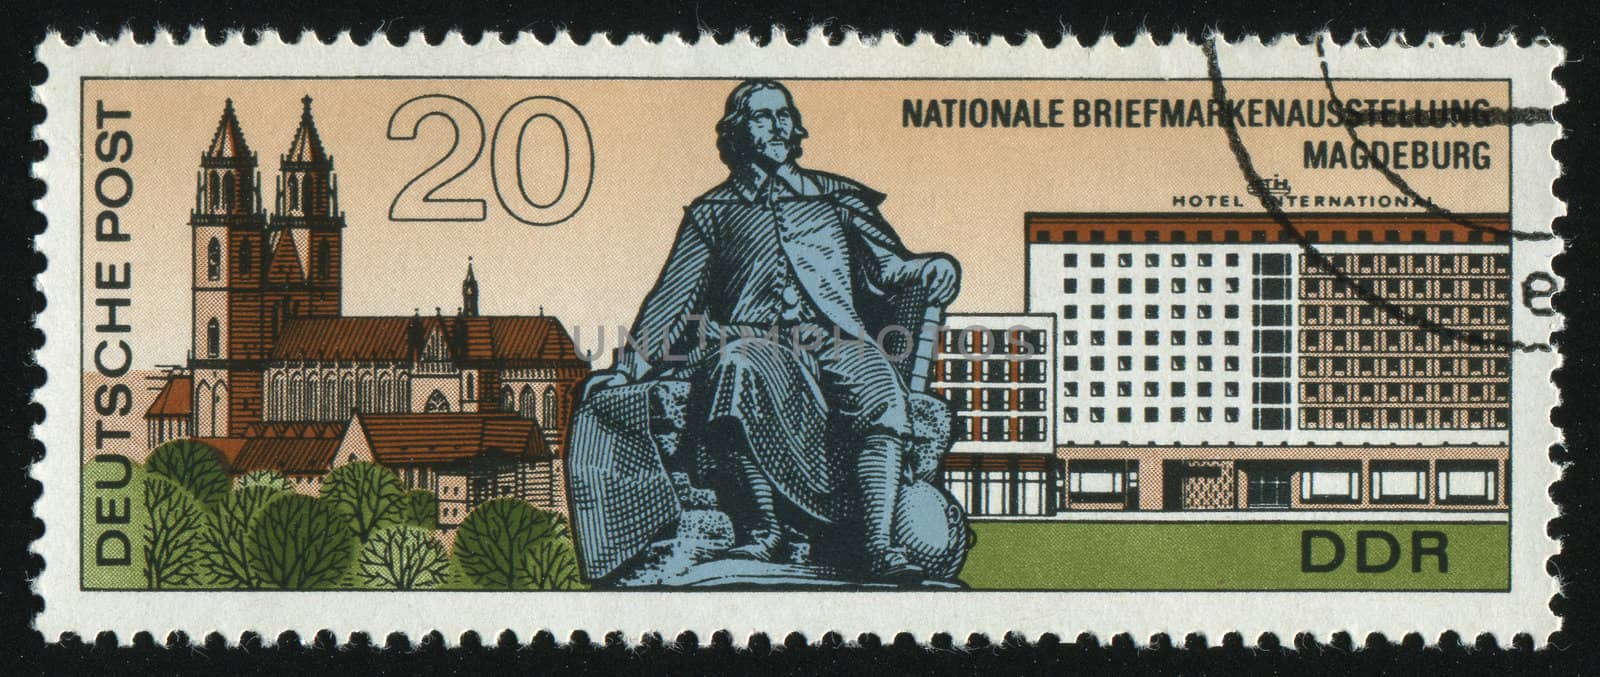 GERMANY- CIRCA 1969: stamp printed by Germany, shows Cathedral, Otto von Guericke Monument and Hotel International Magdeburg, circa 1969.